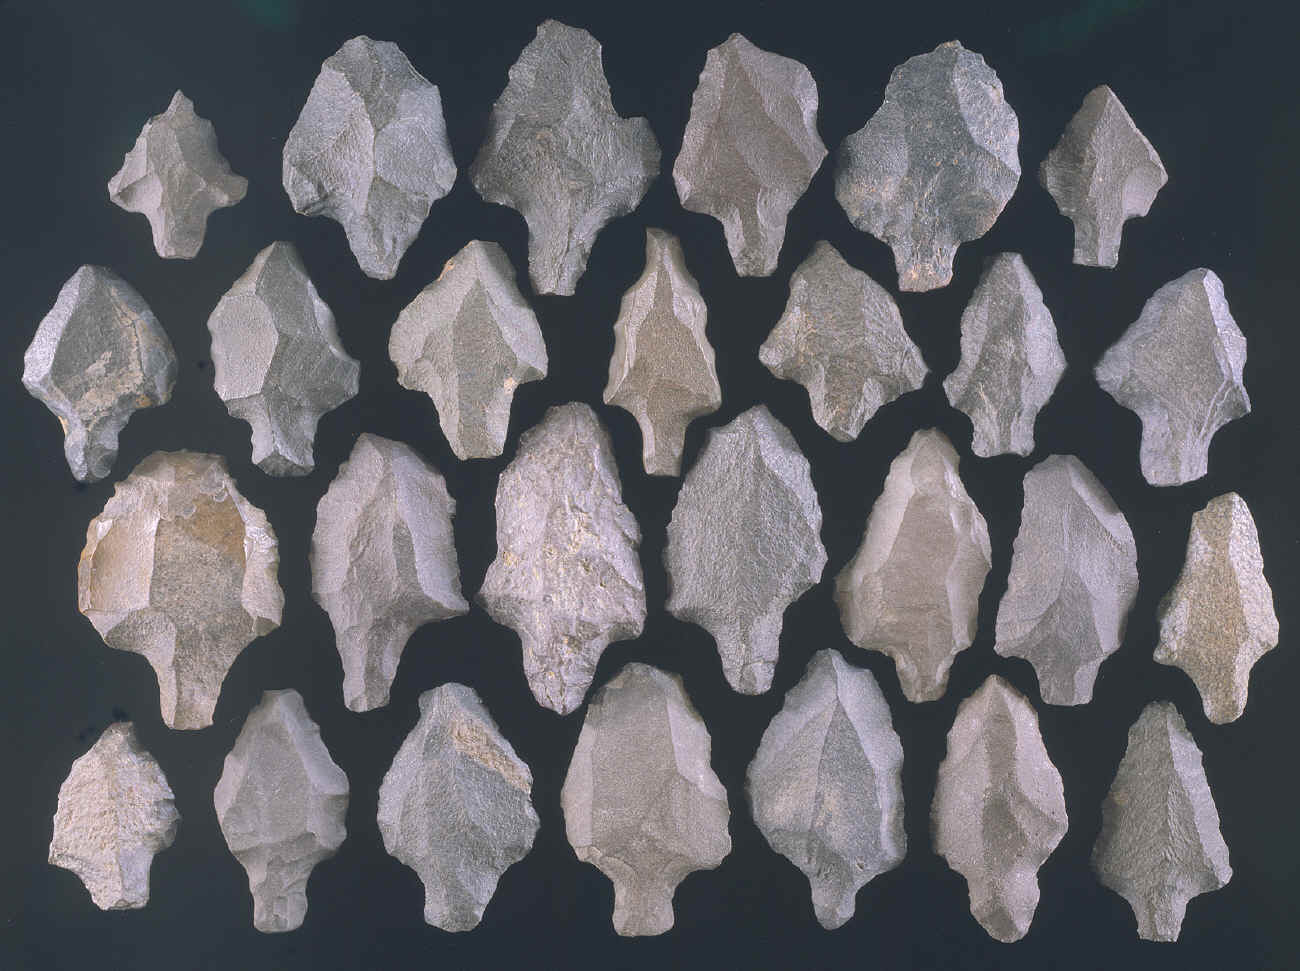 27 tanged Aterian points from Morocco, Africa.